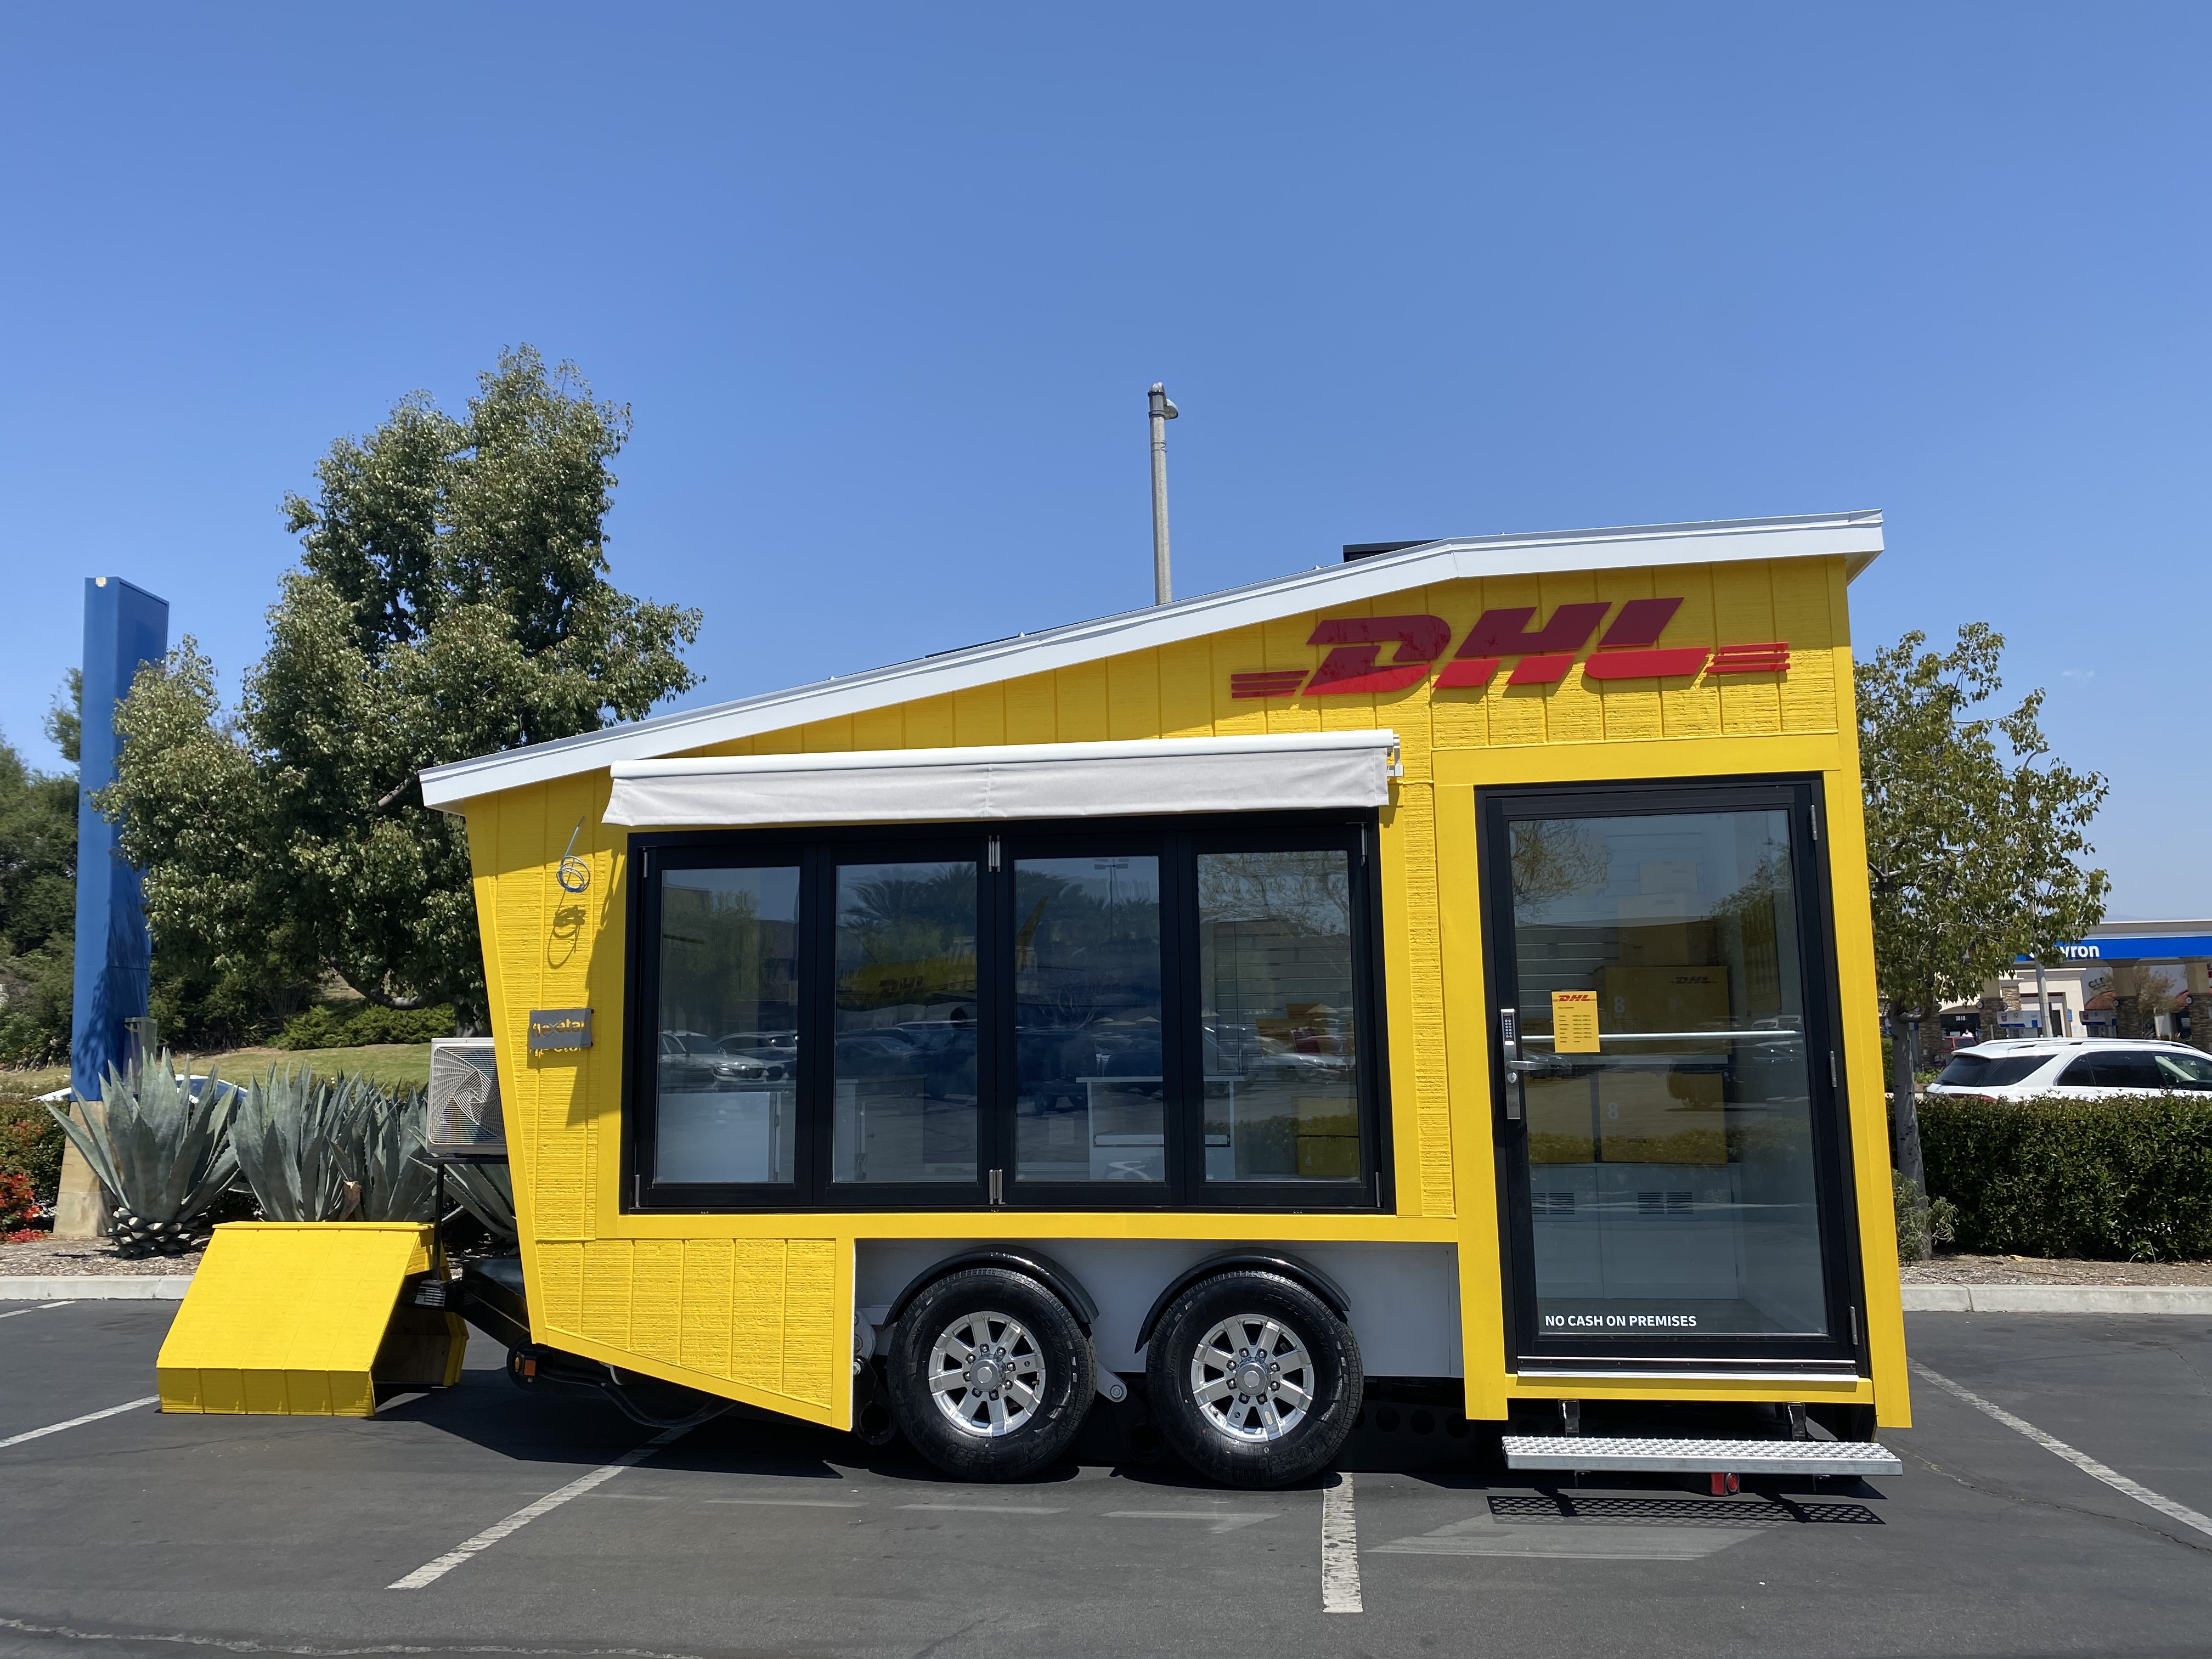 DHL Express rolls into Houston area with mobile pop-up store